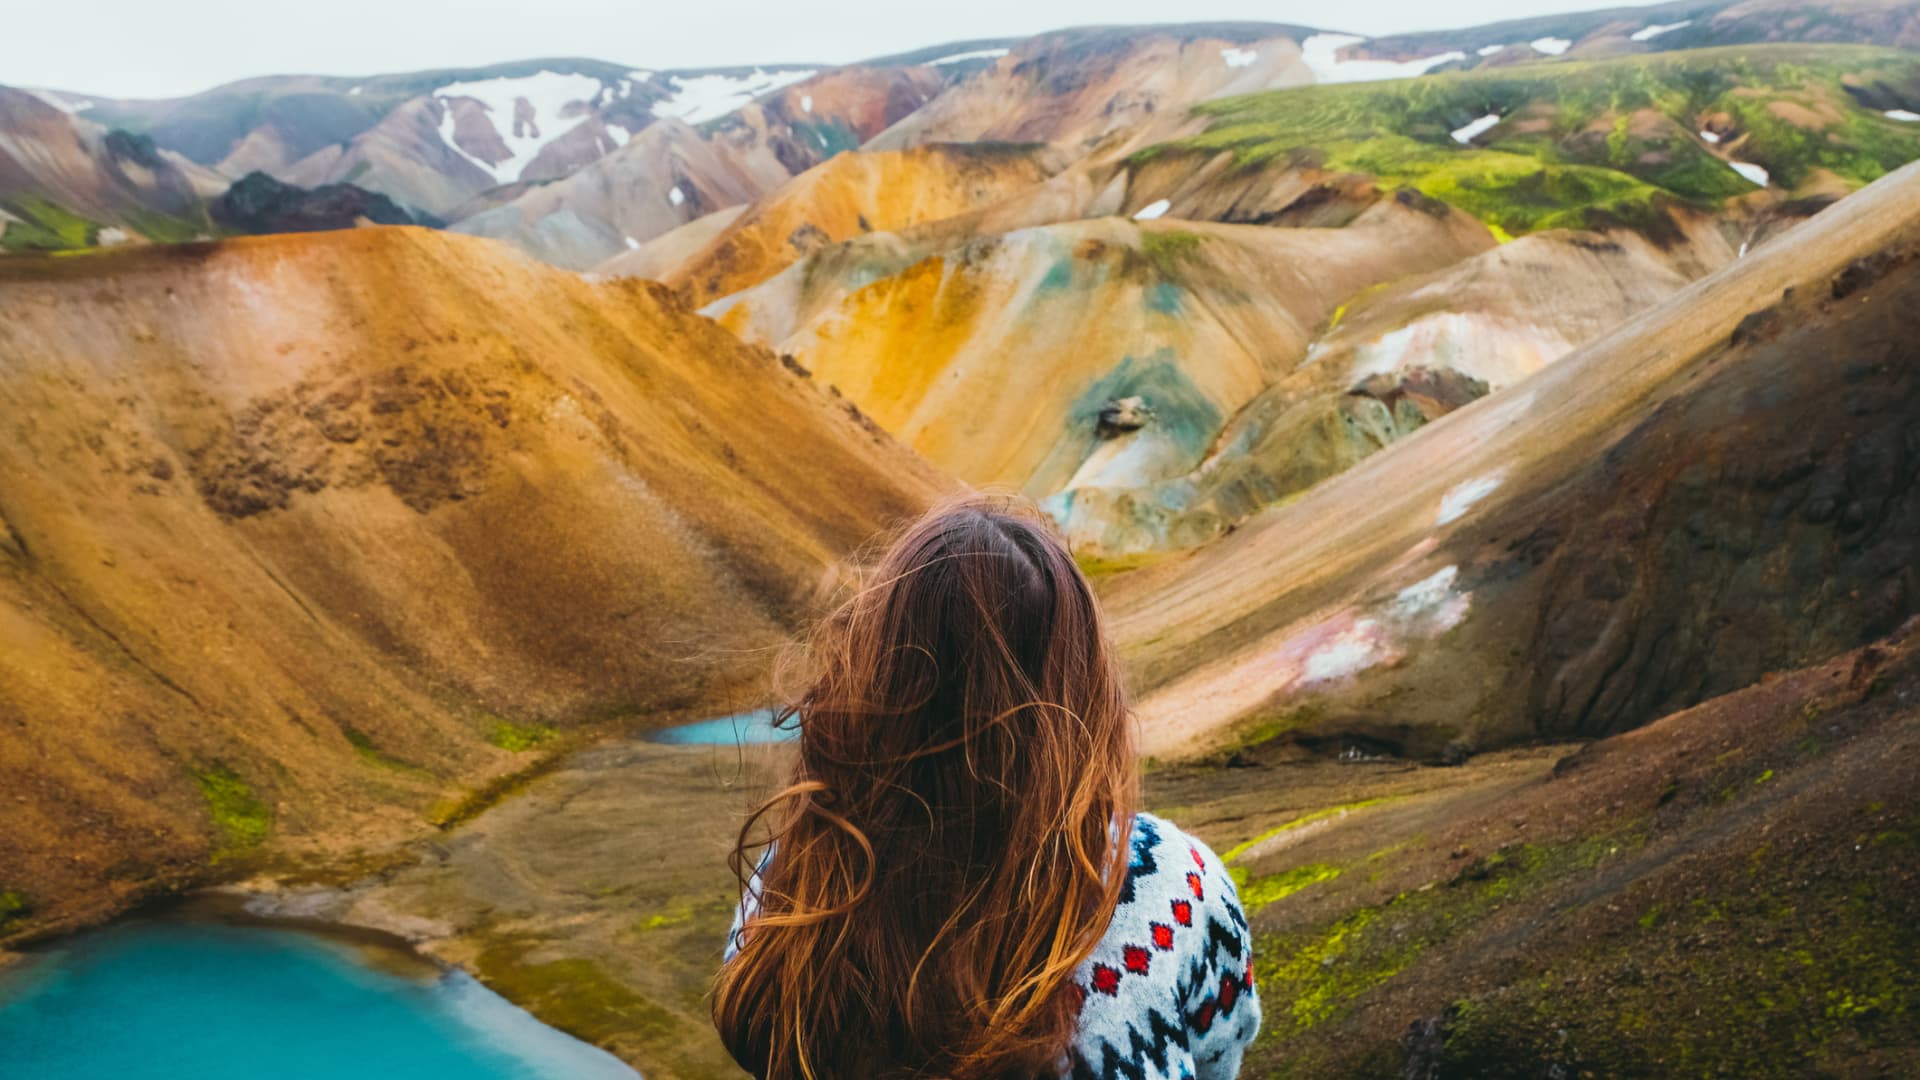 Icelandic airlines have long offered transatlantic passengers free stopovers at the international hub at Keflavik, Iceland, to promote tourism to places like the Landmannalaugar Valley.